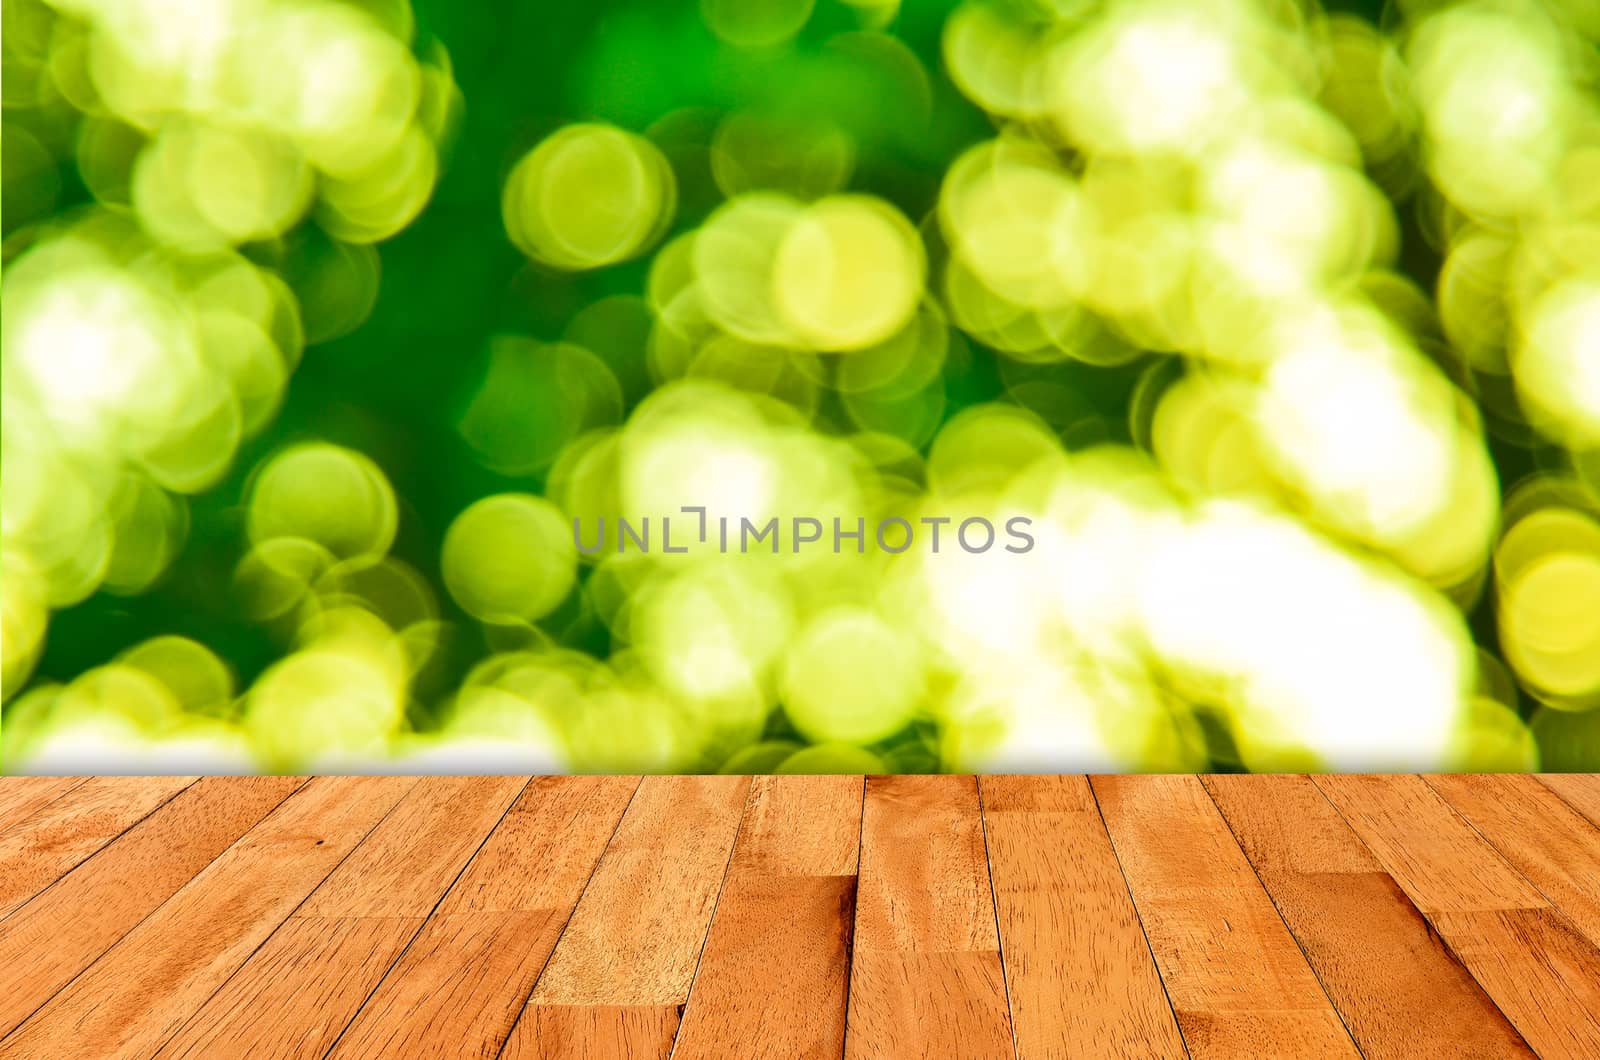 Sparkling bokeh wall and wooden plank floor,Template mock up for display of your product